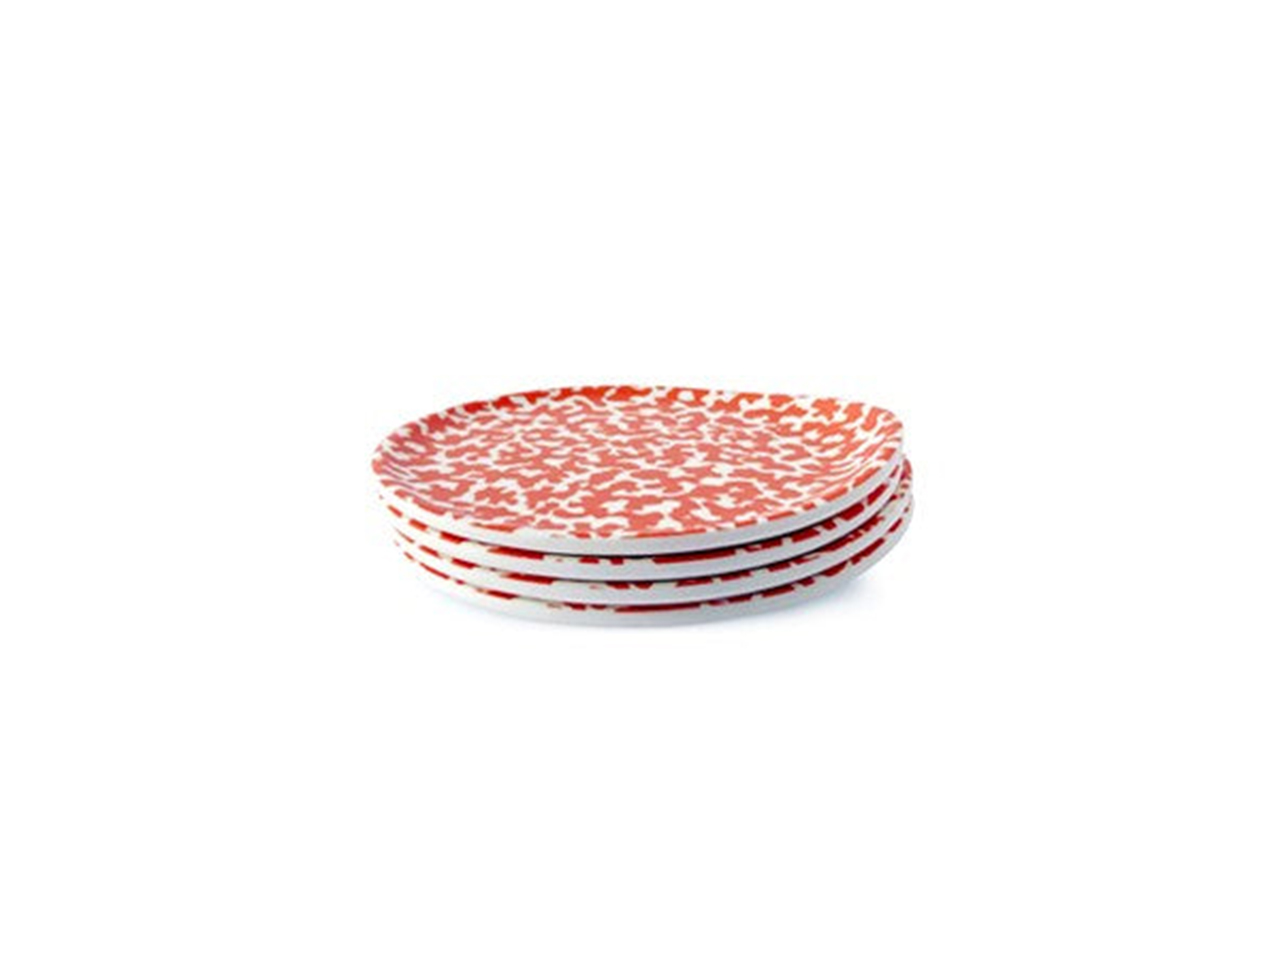 A set of four bamboo and melamine coasters with orange patterns from Xenia Taler for outdoor entertaining.